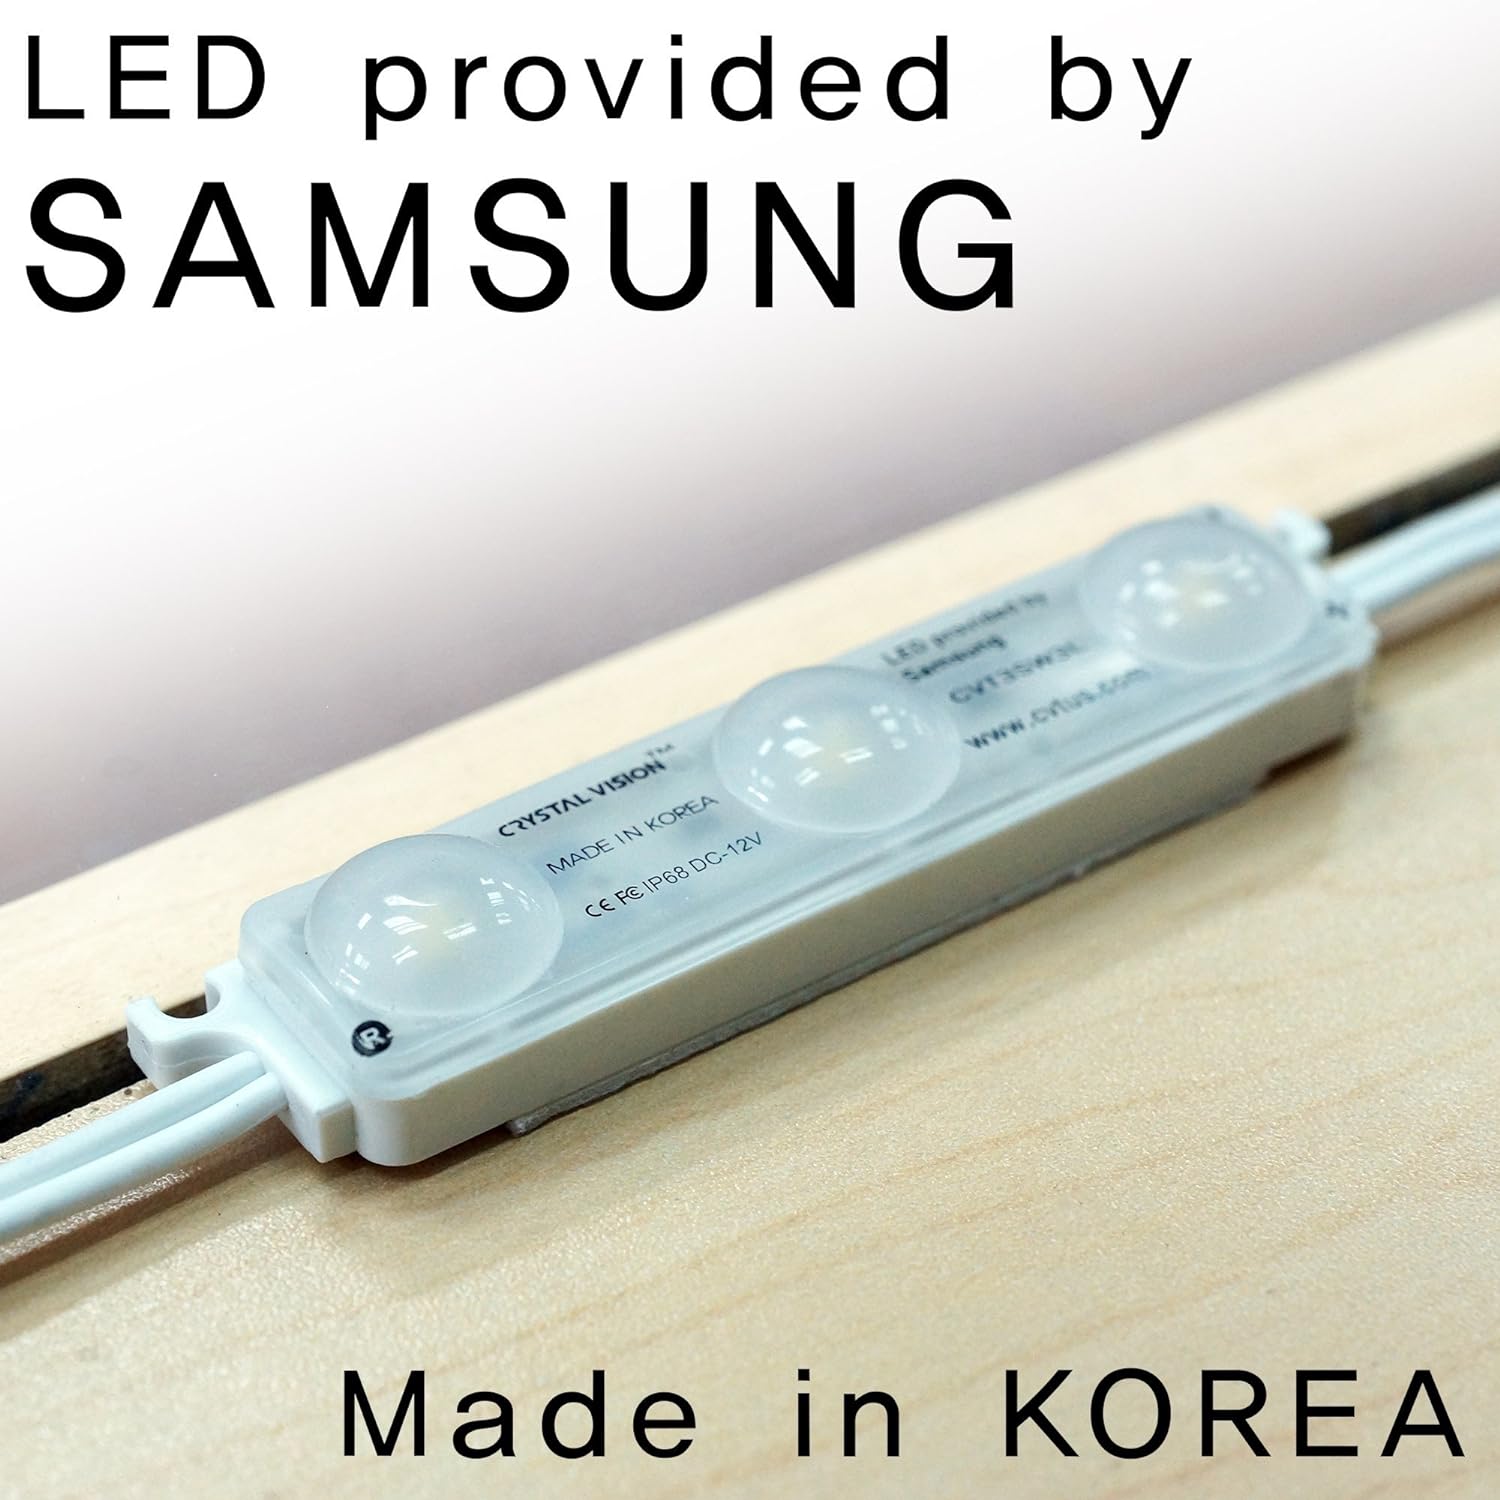 Close-up image of a Crystal Vision LED module with three illuminated lights installed in showcase, marked _LED provided by Samsung_, _Made in Korea_, and the company_s website address